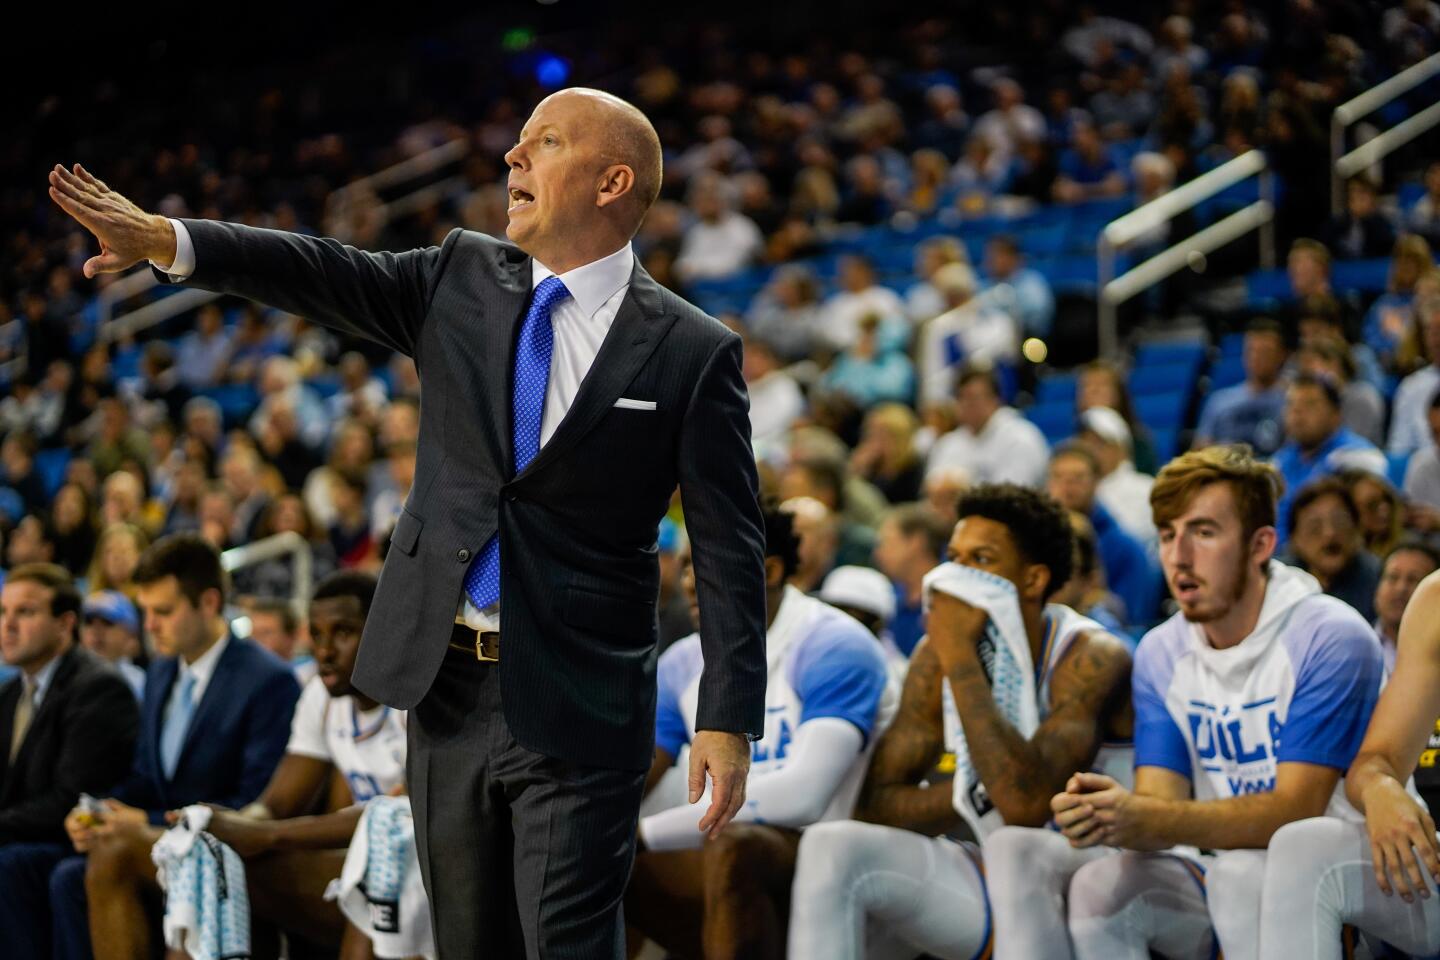 UCLA coach Mick Cronin gestures to his players during the first half of a game against Long Beach State on Nov. 6 at Pauley Pavilion.